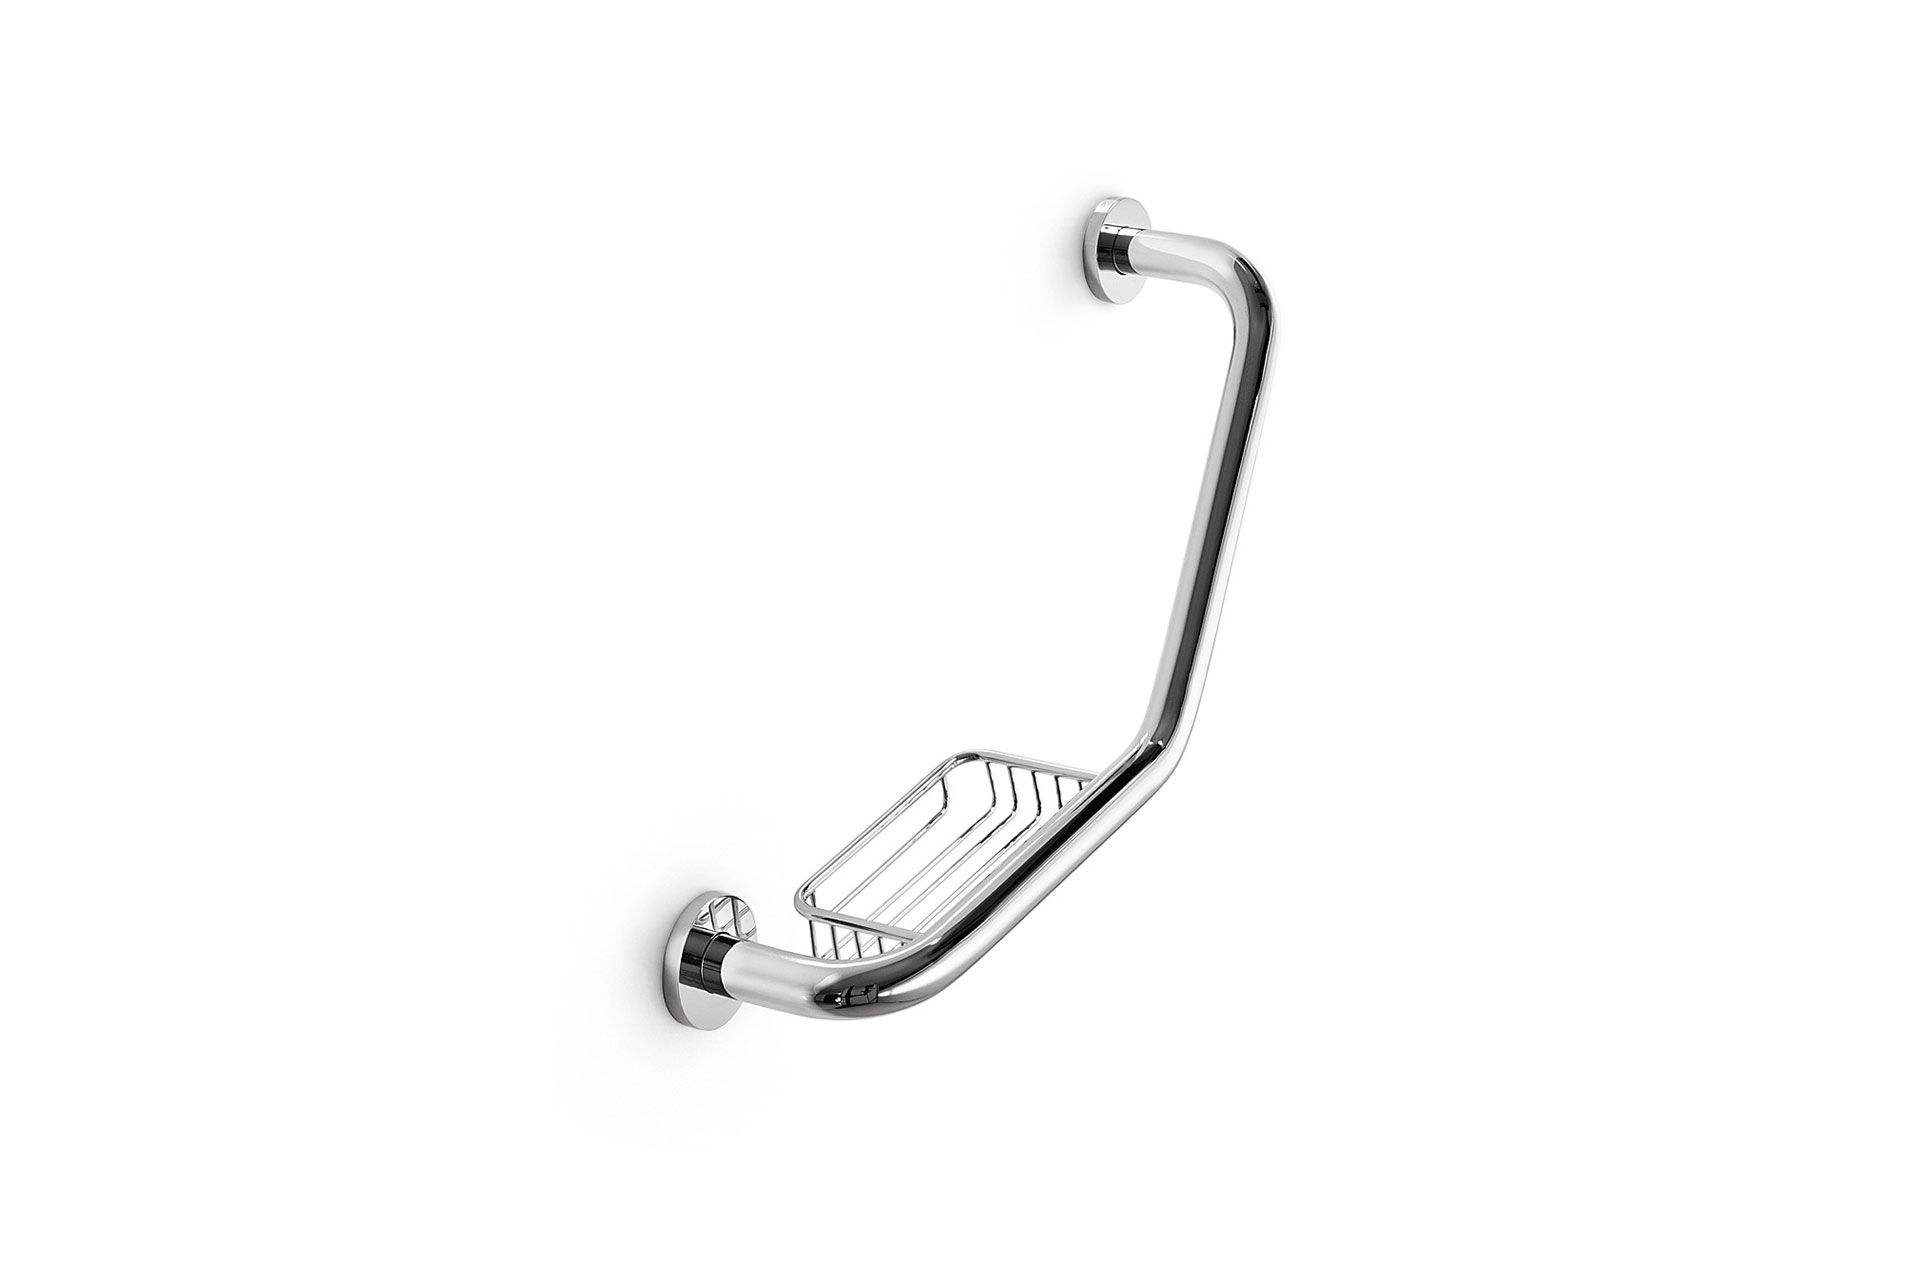 Reversible grab security bar with soap holder